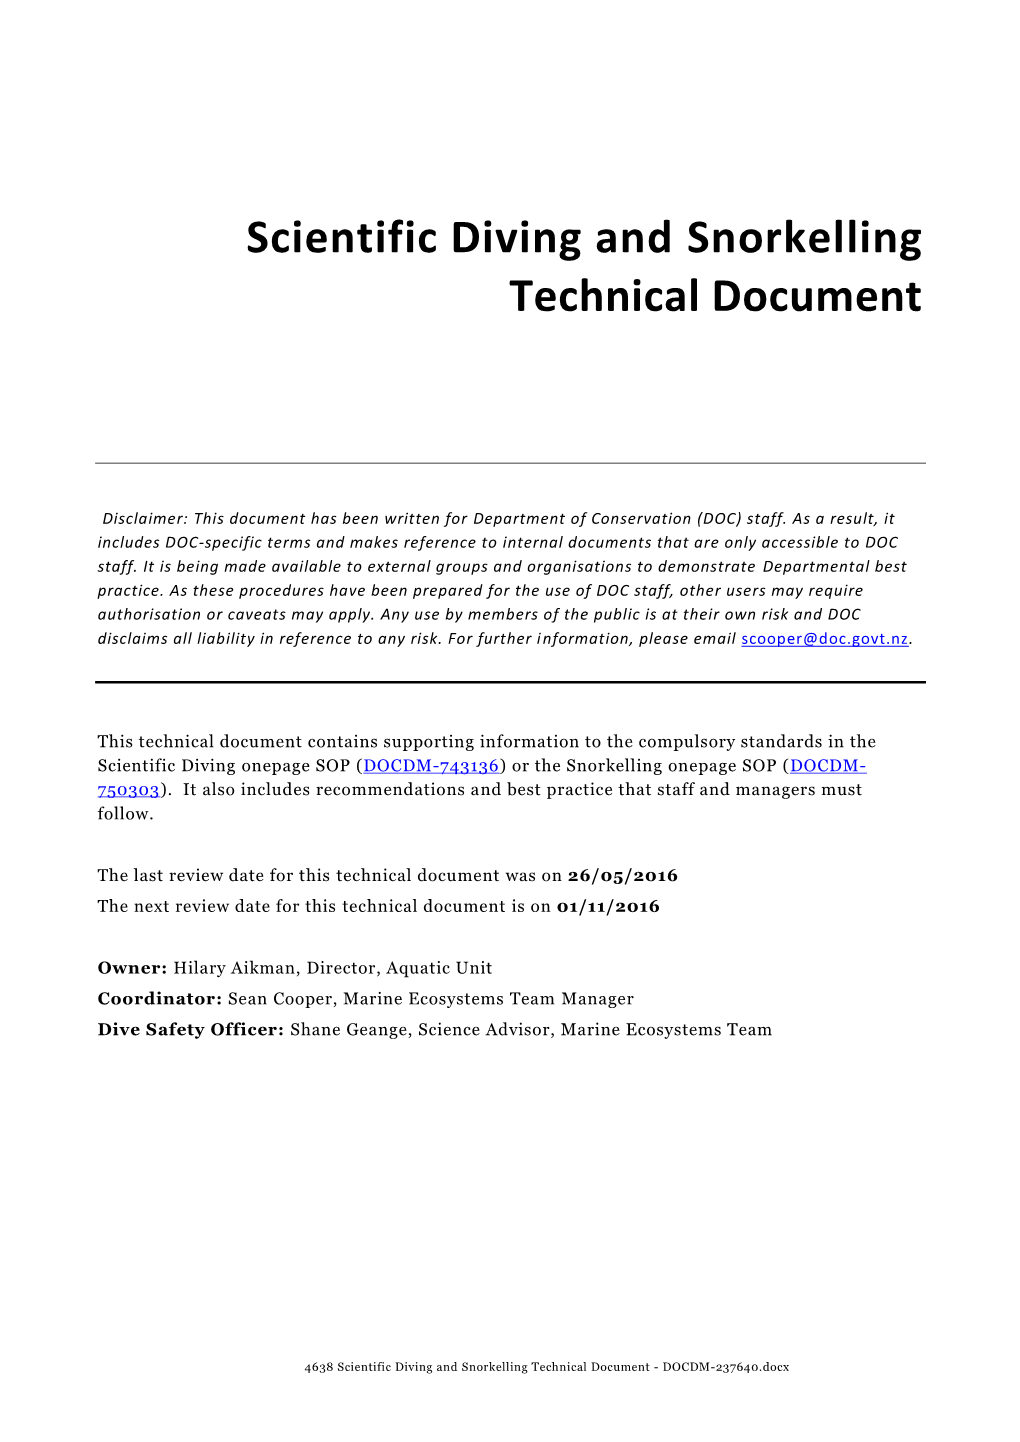 DOCCM-237640 Scientific Diving and Snorkelling Technical Document